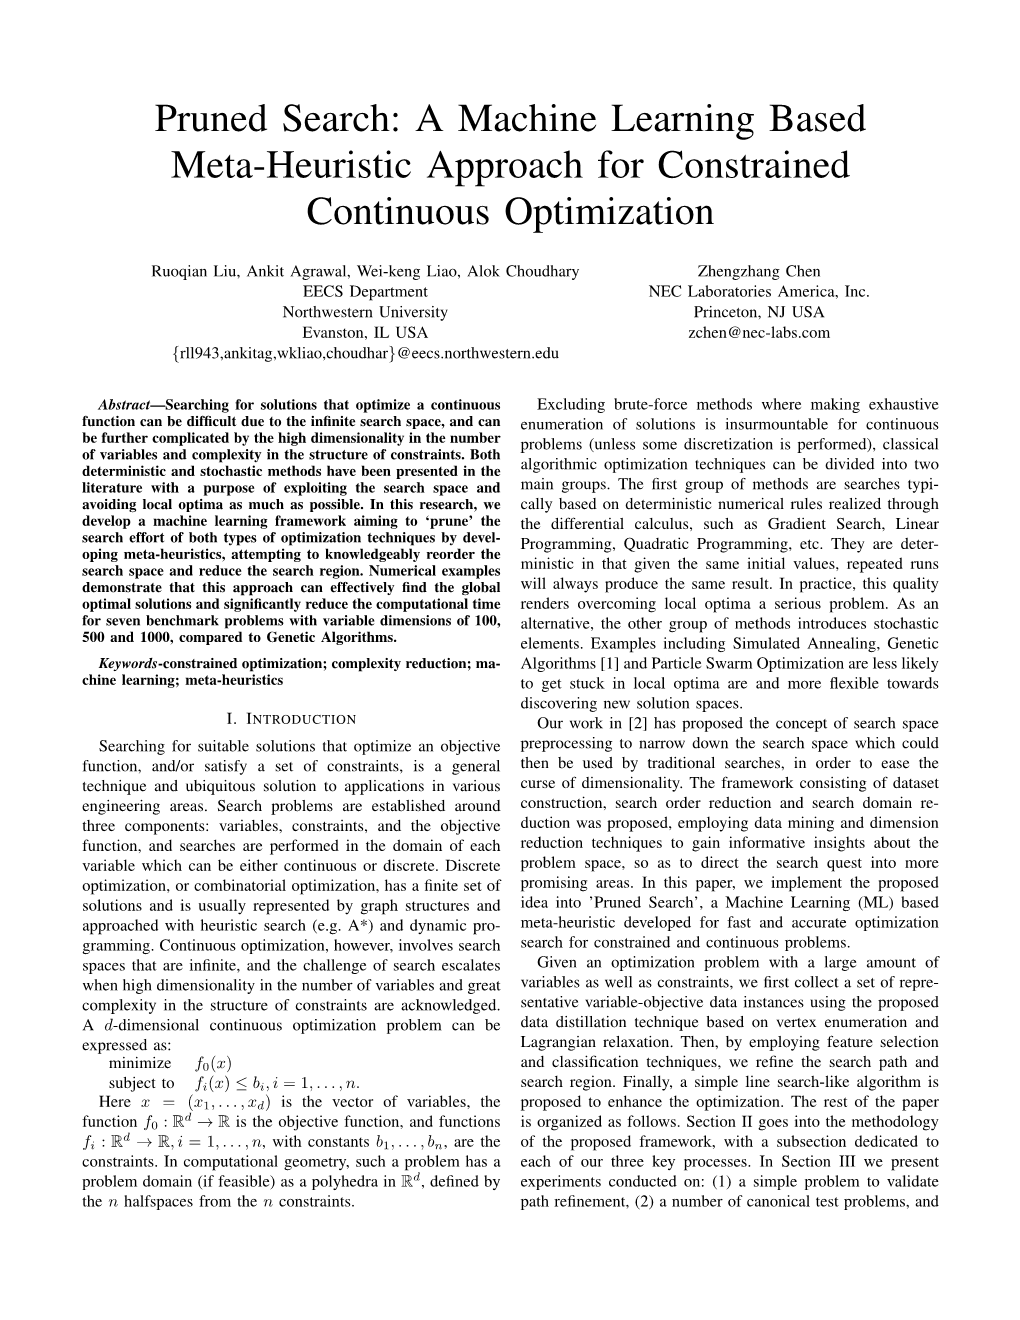 A Machine Learning Based Meta-Heuristic Approach for Constrained Continuous Optimization